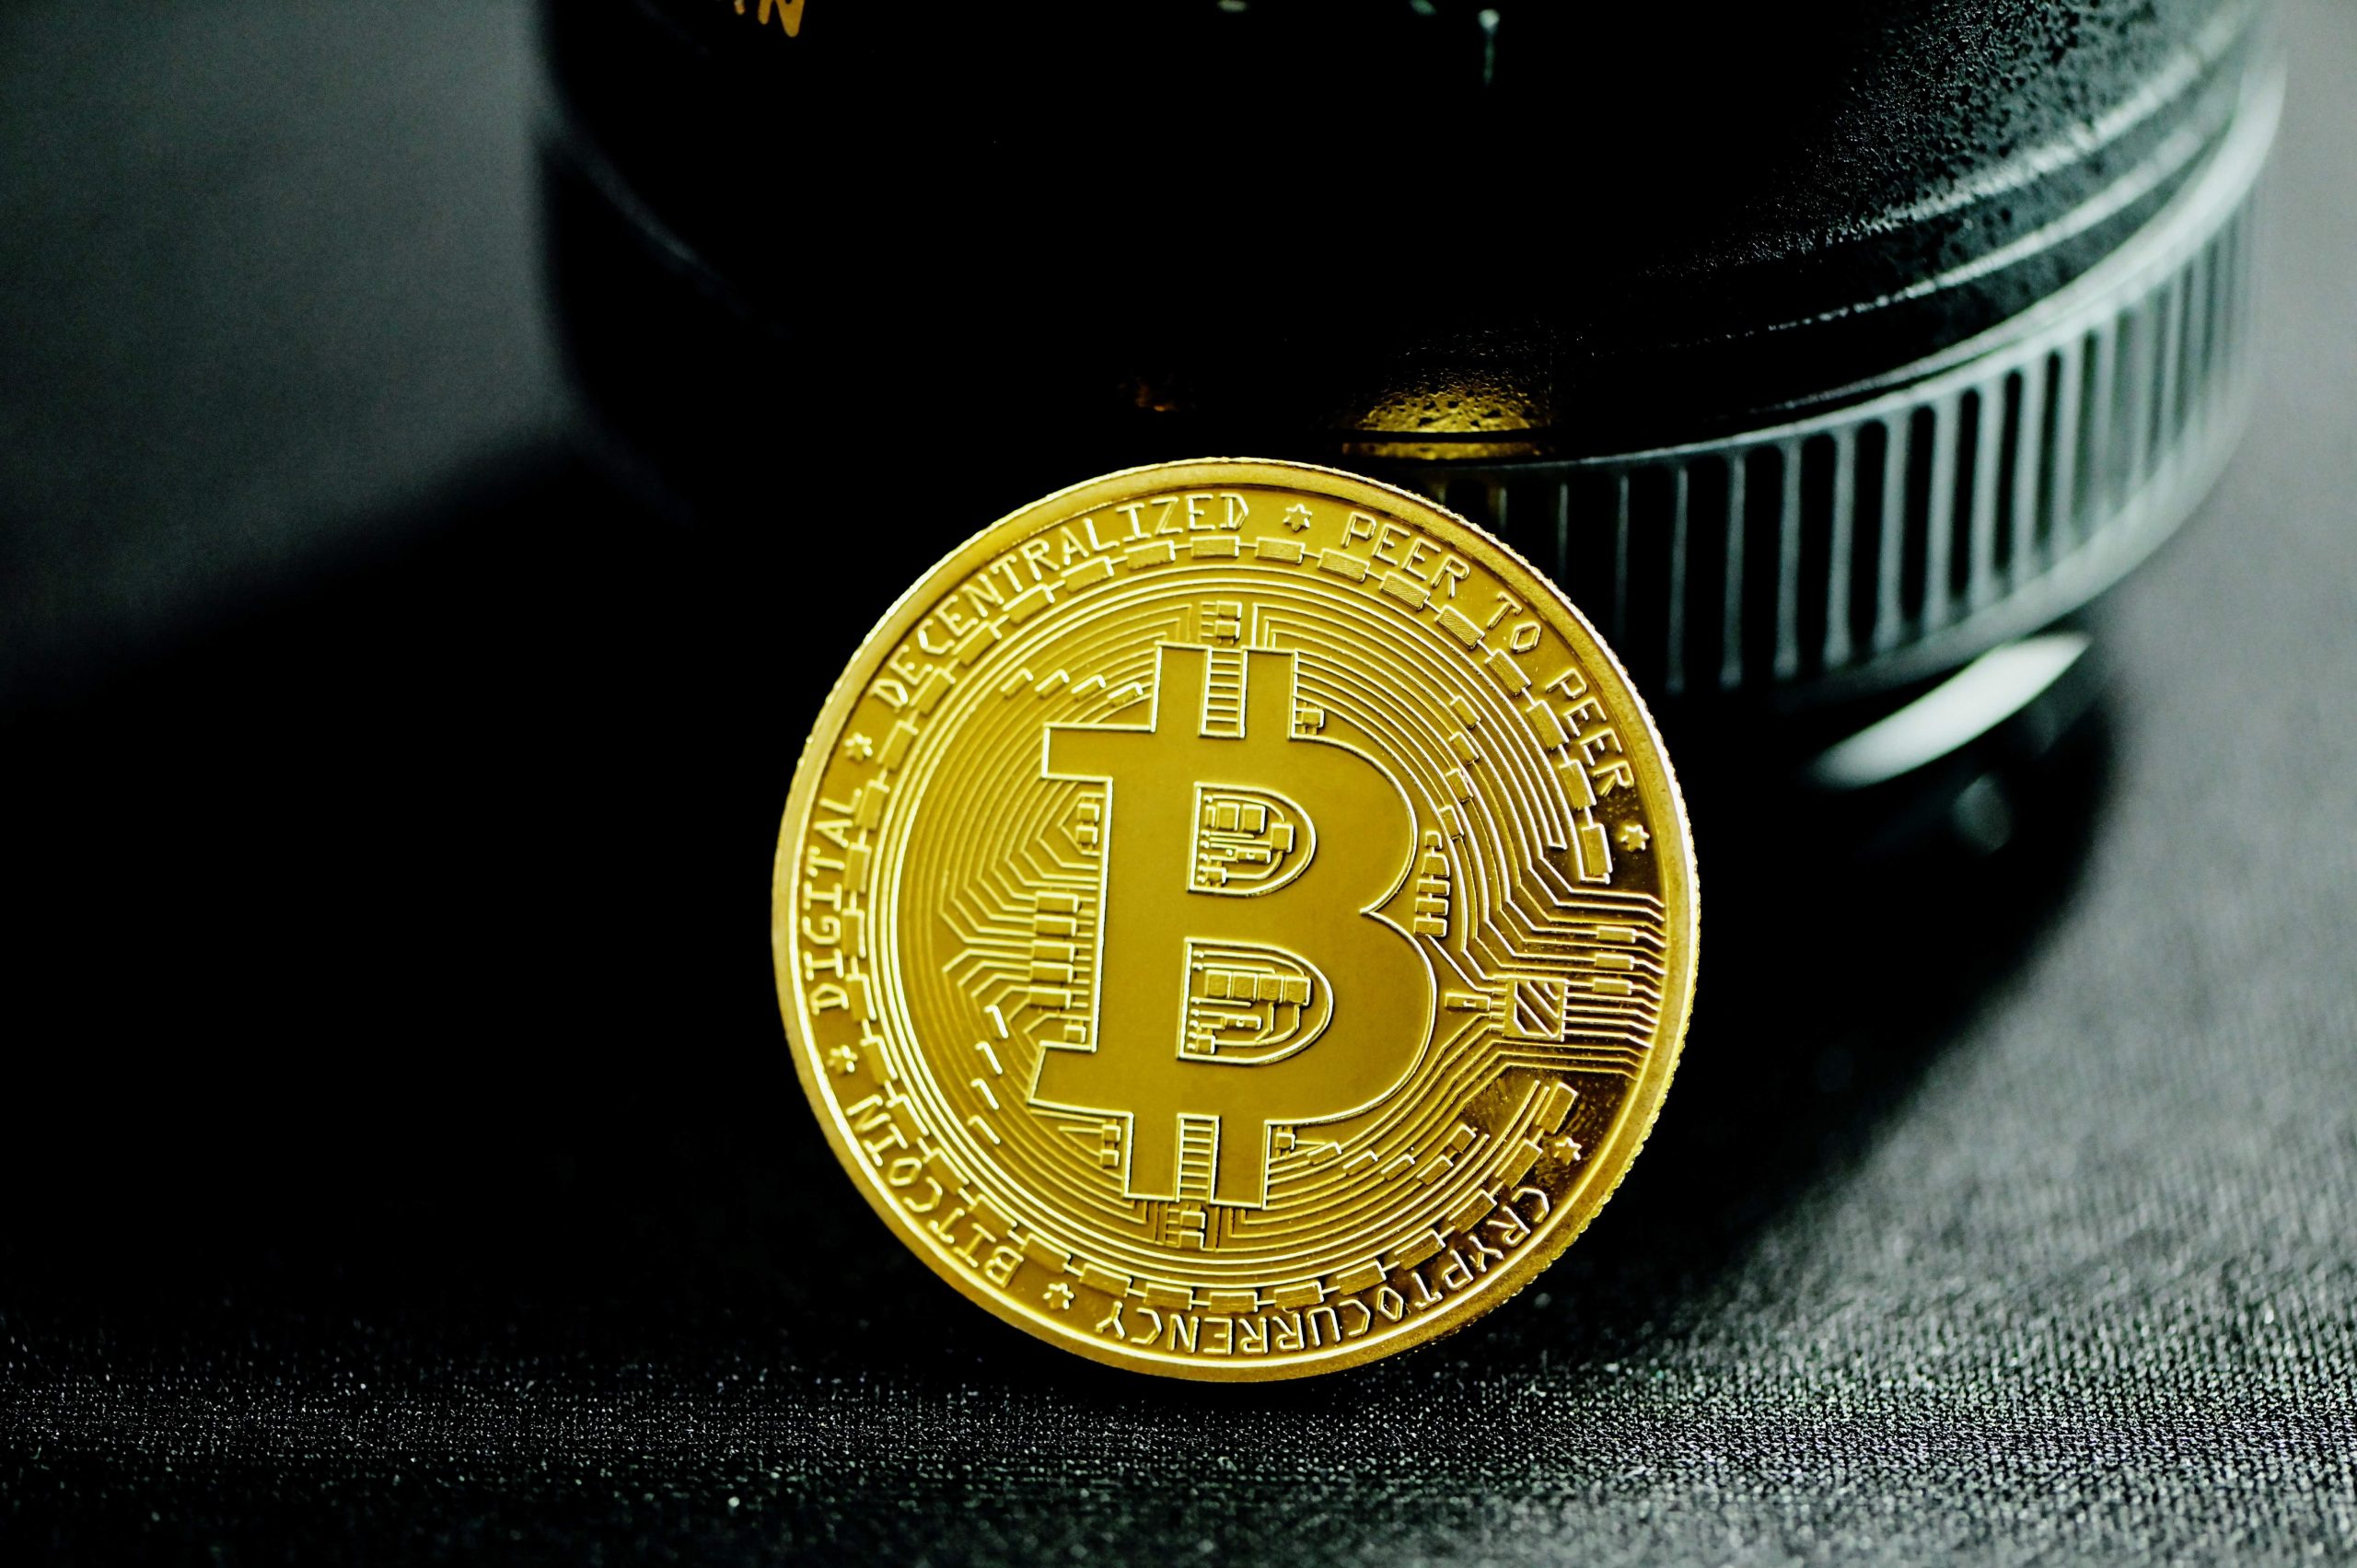 Bulls Successfully Defend $31k, But What’s Next For Bitcoin?